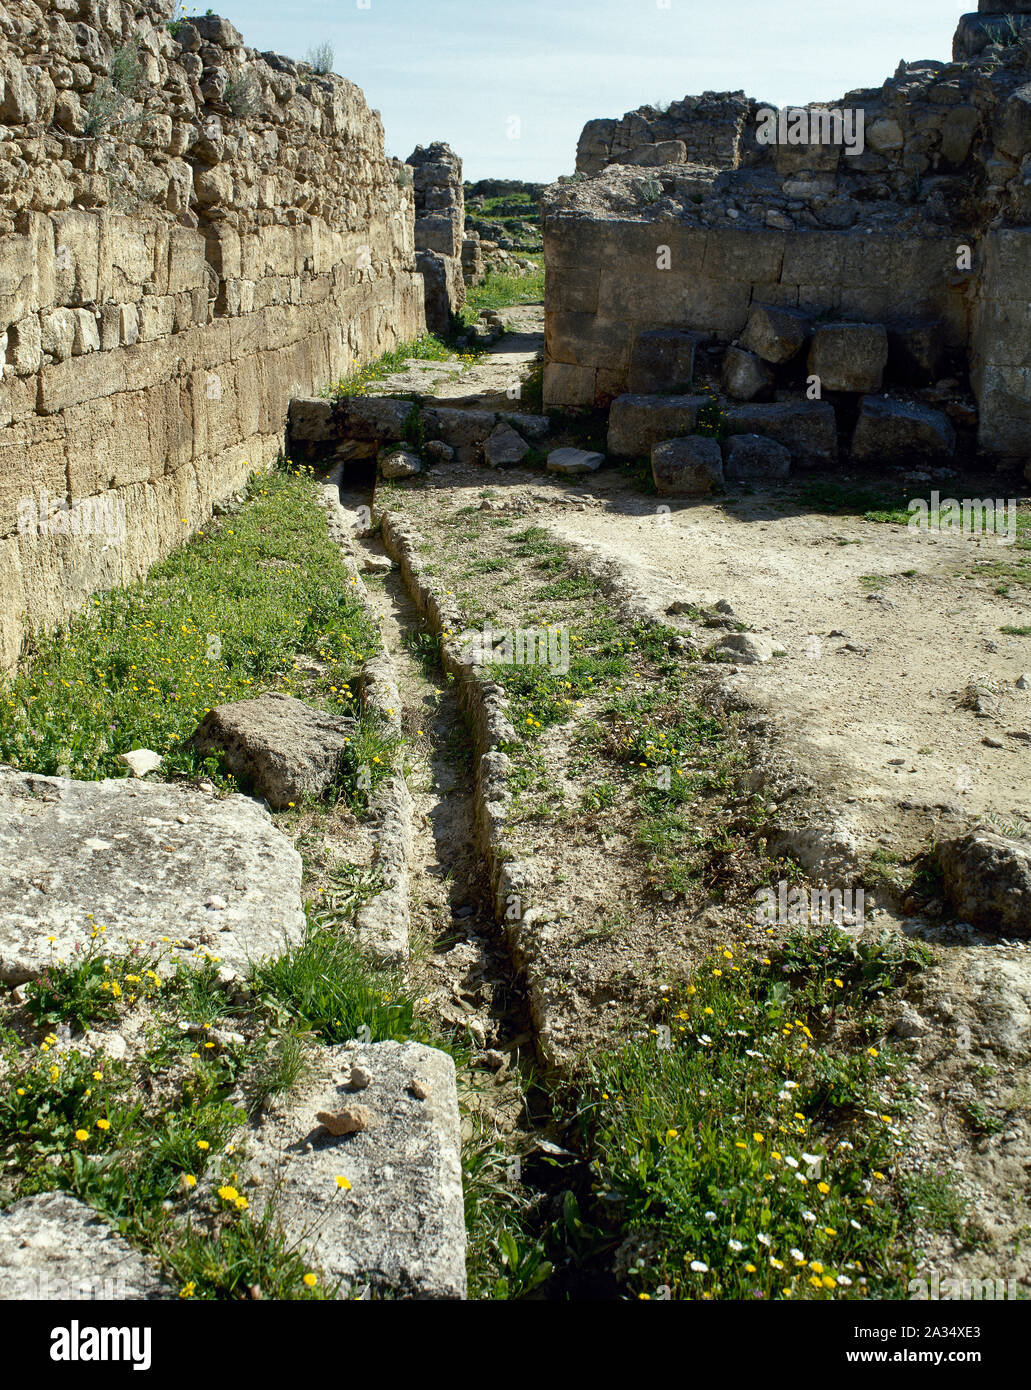 Syria. Ancient Near East. Phoenicians. Ugarit (Ras Shamra). Ancient city, founded in 6000 BC and abandoned in 1190 BC. Remains of an irrigation ditch. (Photo taken before the Syrian Civil War). Stock Photo